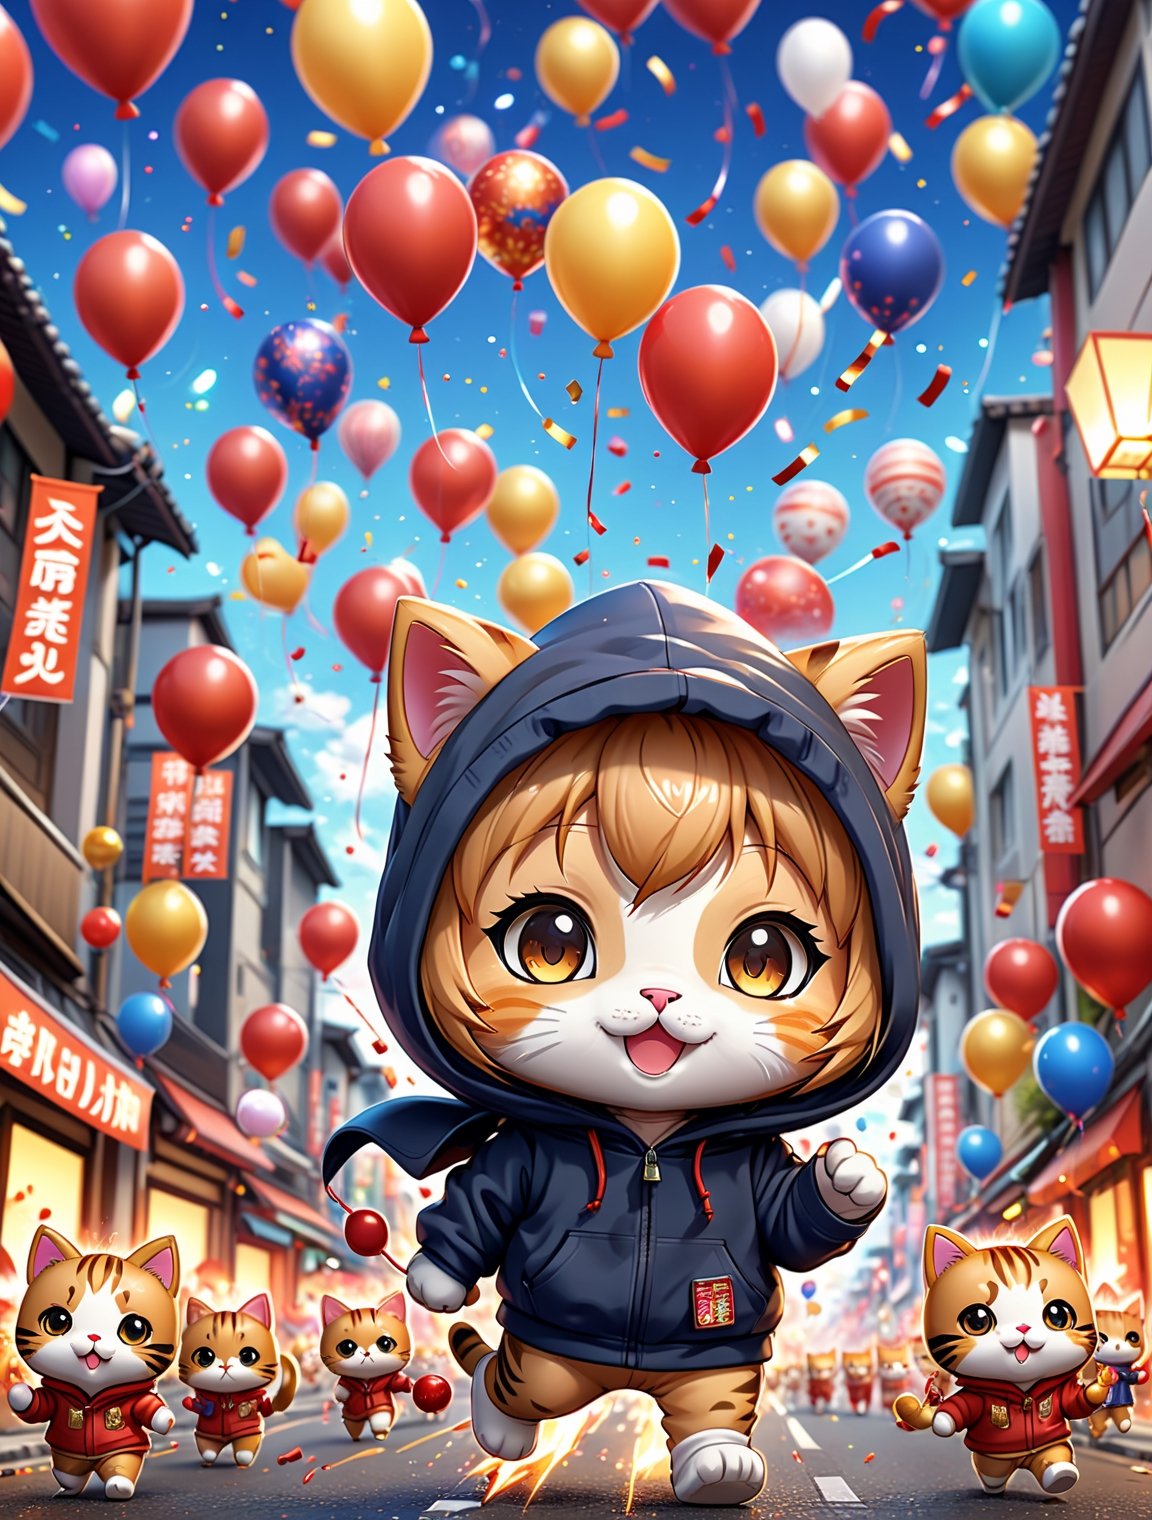 ((anime chibi style)), cute cats in hoodie parade on busy street, new year setting, balloon and firecrackers, dynamic angle, depth of field, detail XL, solo,(anime)